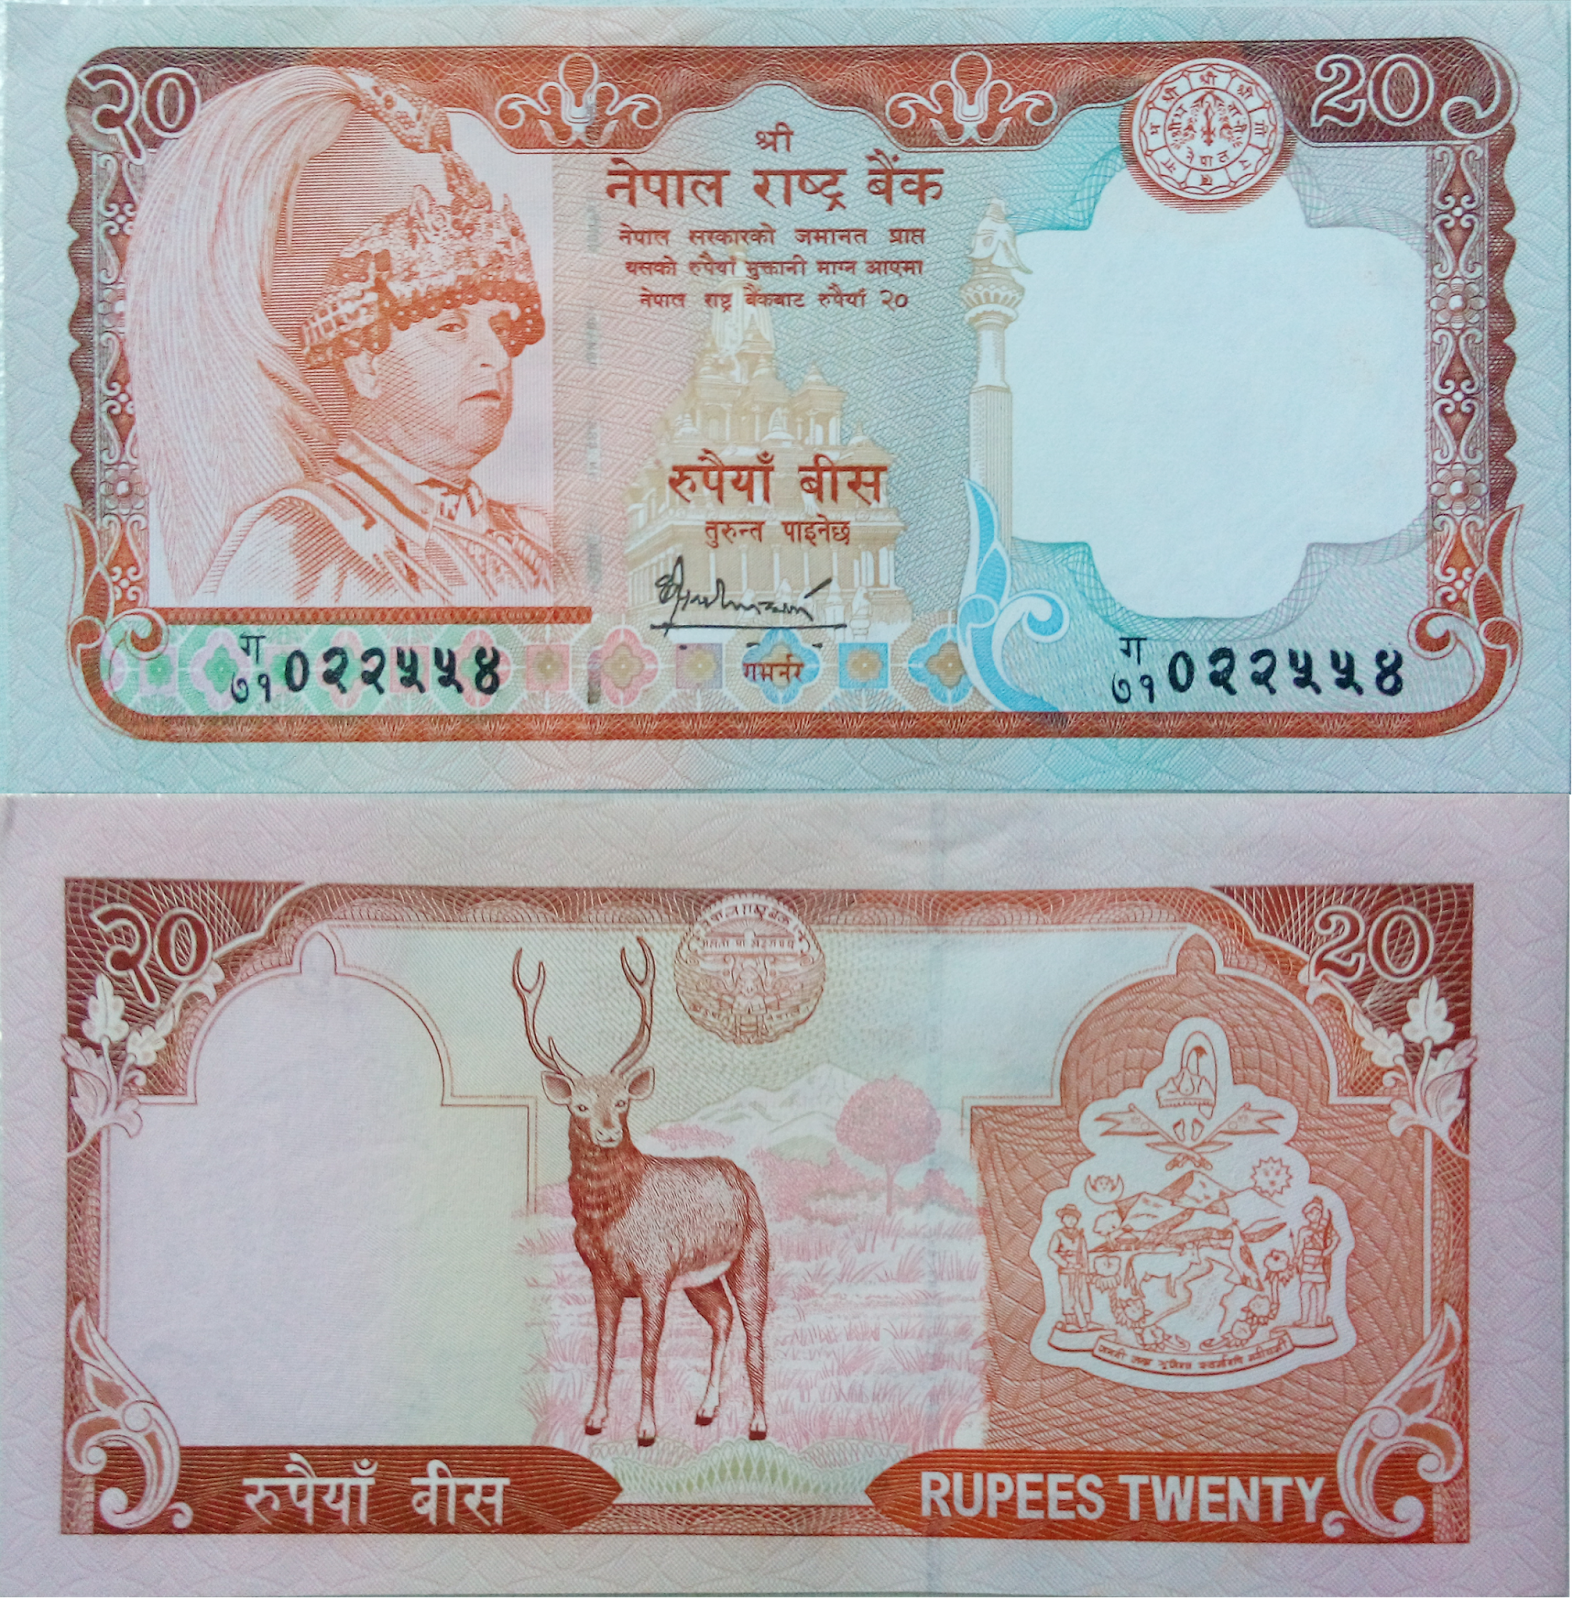 Buy World Currency Online Nepal